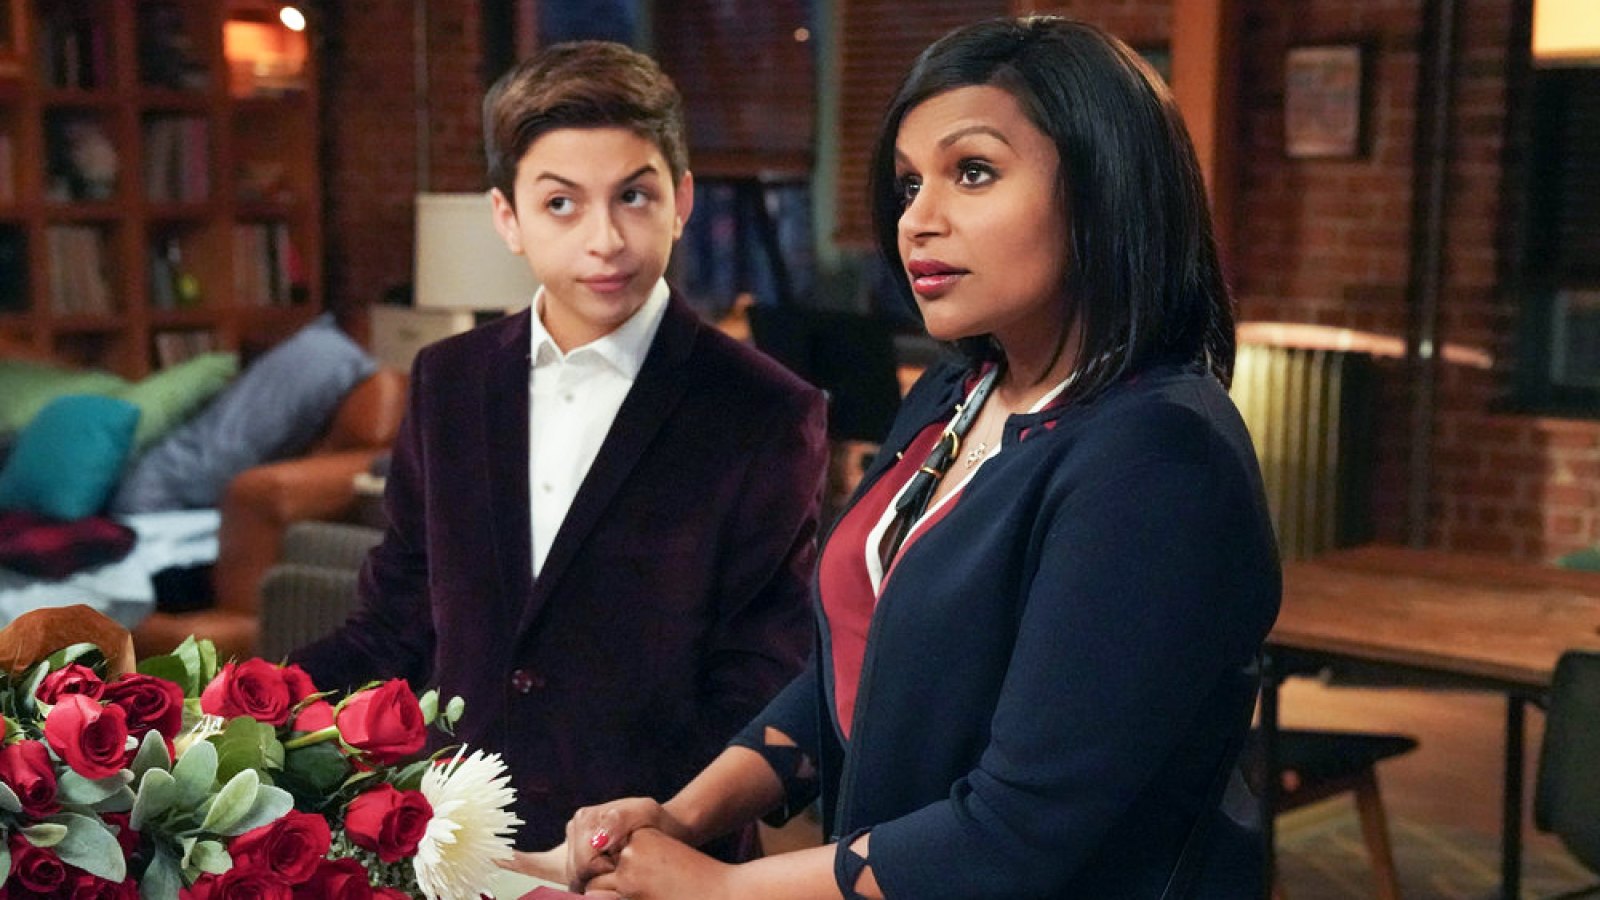 ‘Champions’ Star J.J. Totah Comes Out as Transgender: ‘My Name Is Josie’